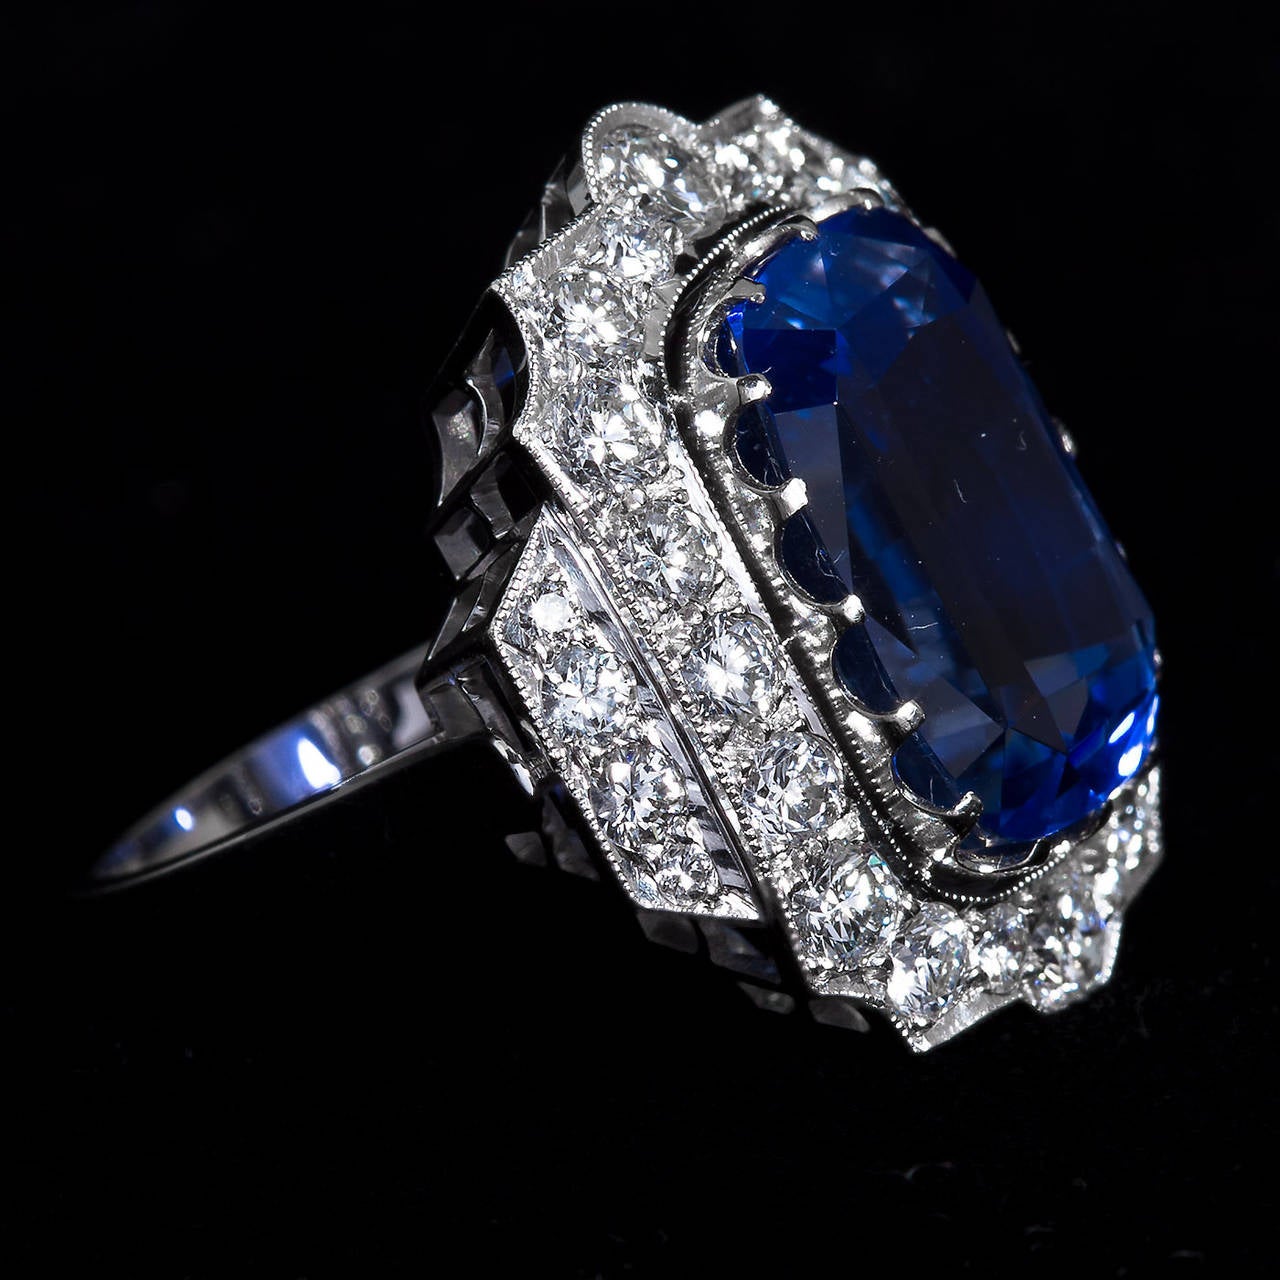 An Art Deco styled ring with a large brilliant blue 16.26 carat cushion cut Ceylon sapphire center stone set in diamond and 18k white gold gallery in a graceful arched styling. Sapphire is not heat treated and measures 15.40 x 11.50 mm. Diamonds are